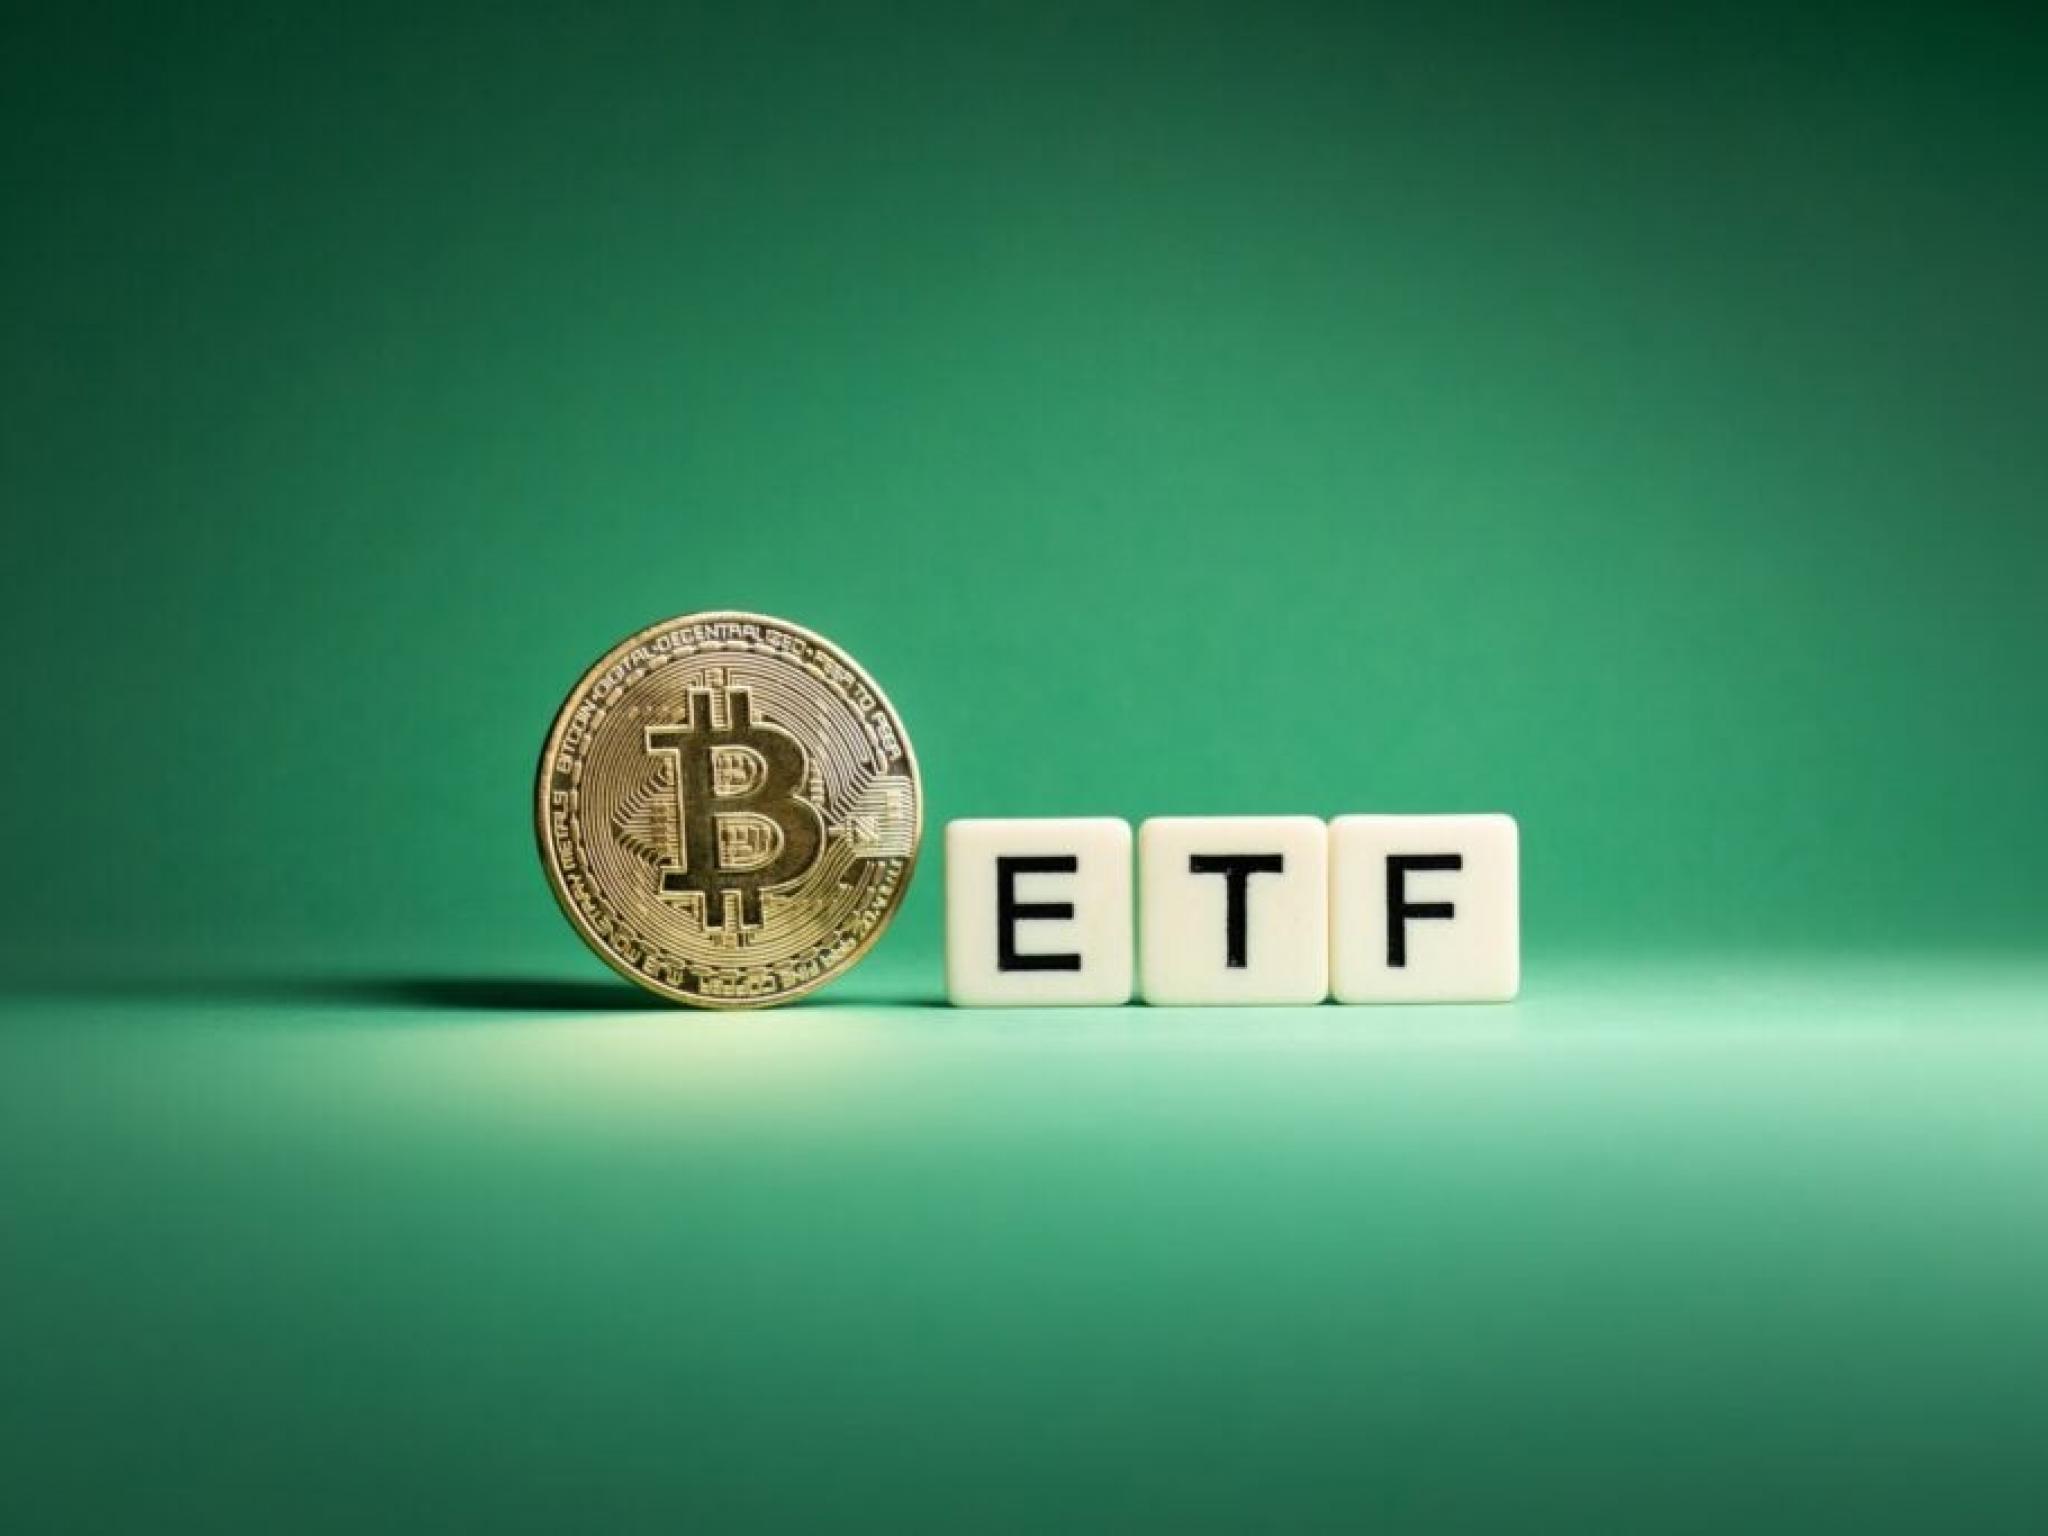  why-is-bitcoin-stuck-at-resistance-despite-record-etf-inflows 